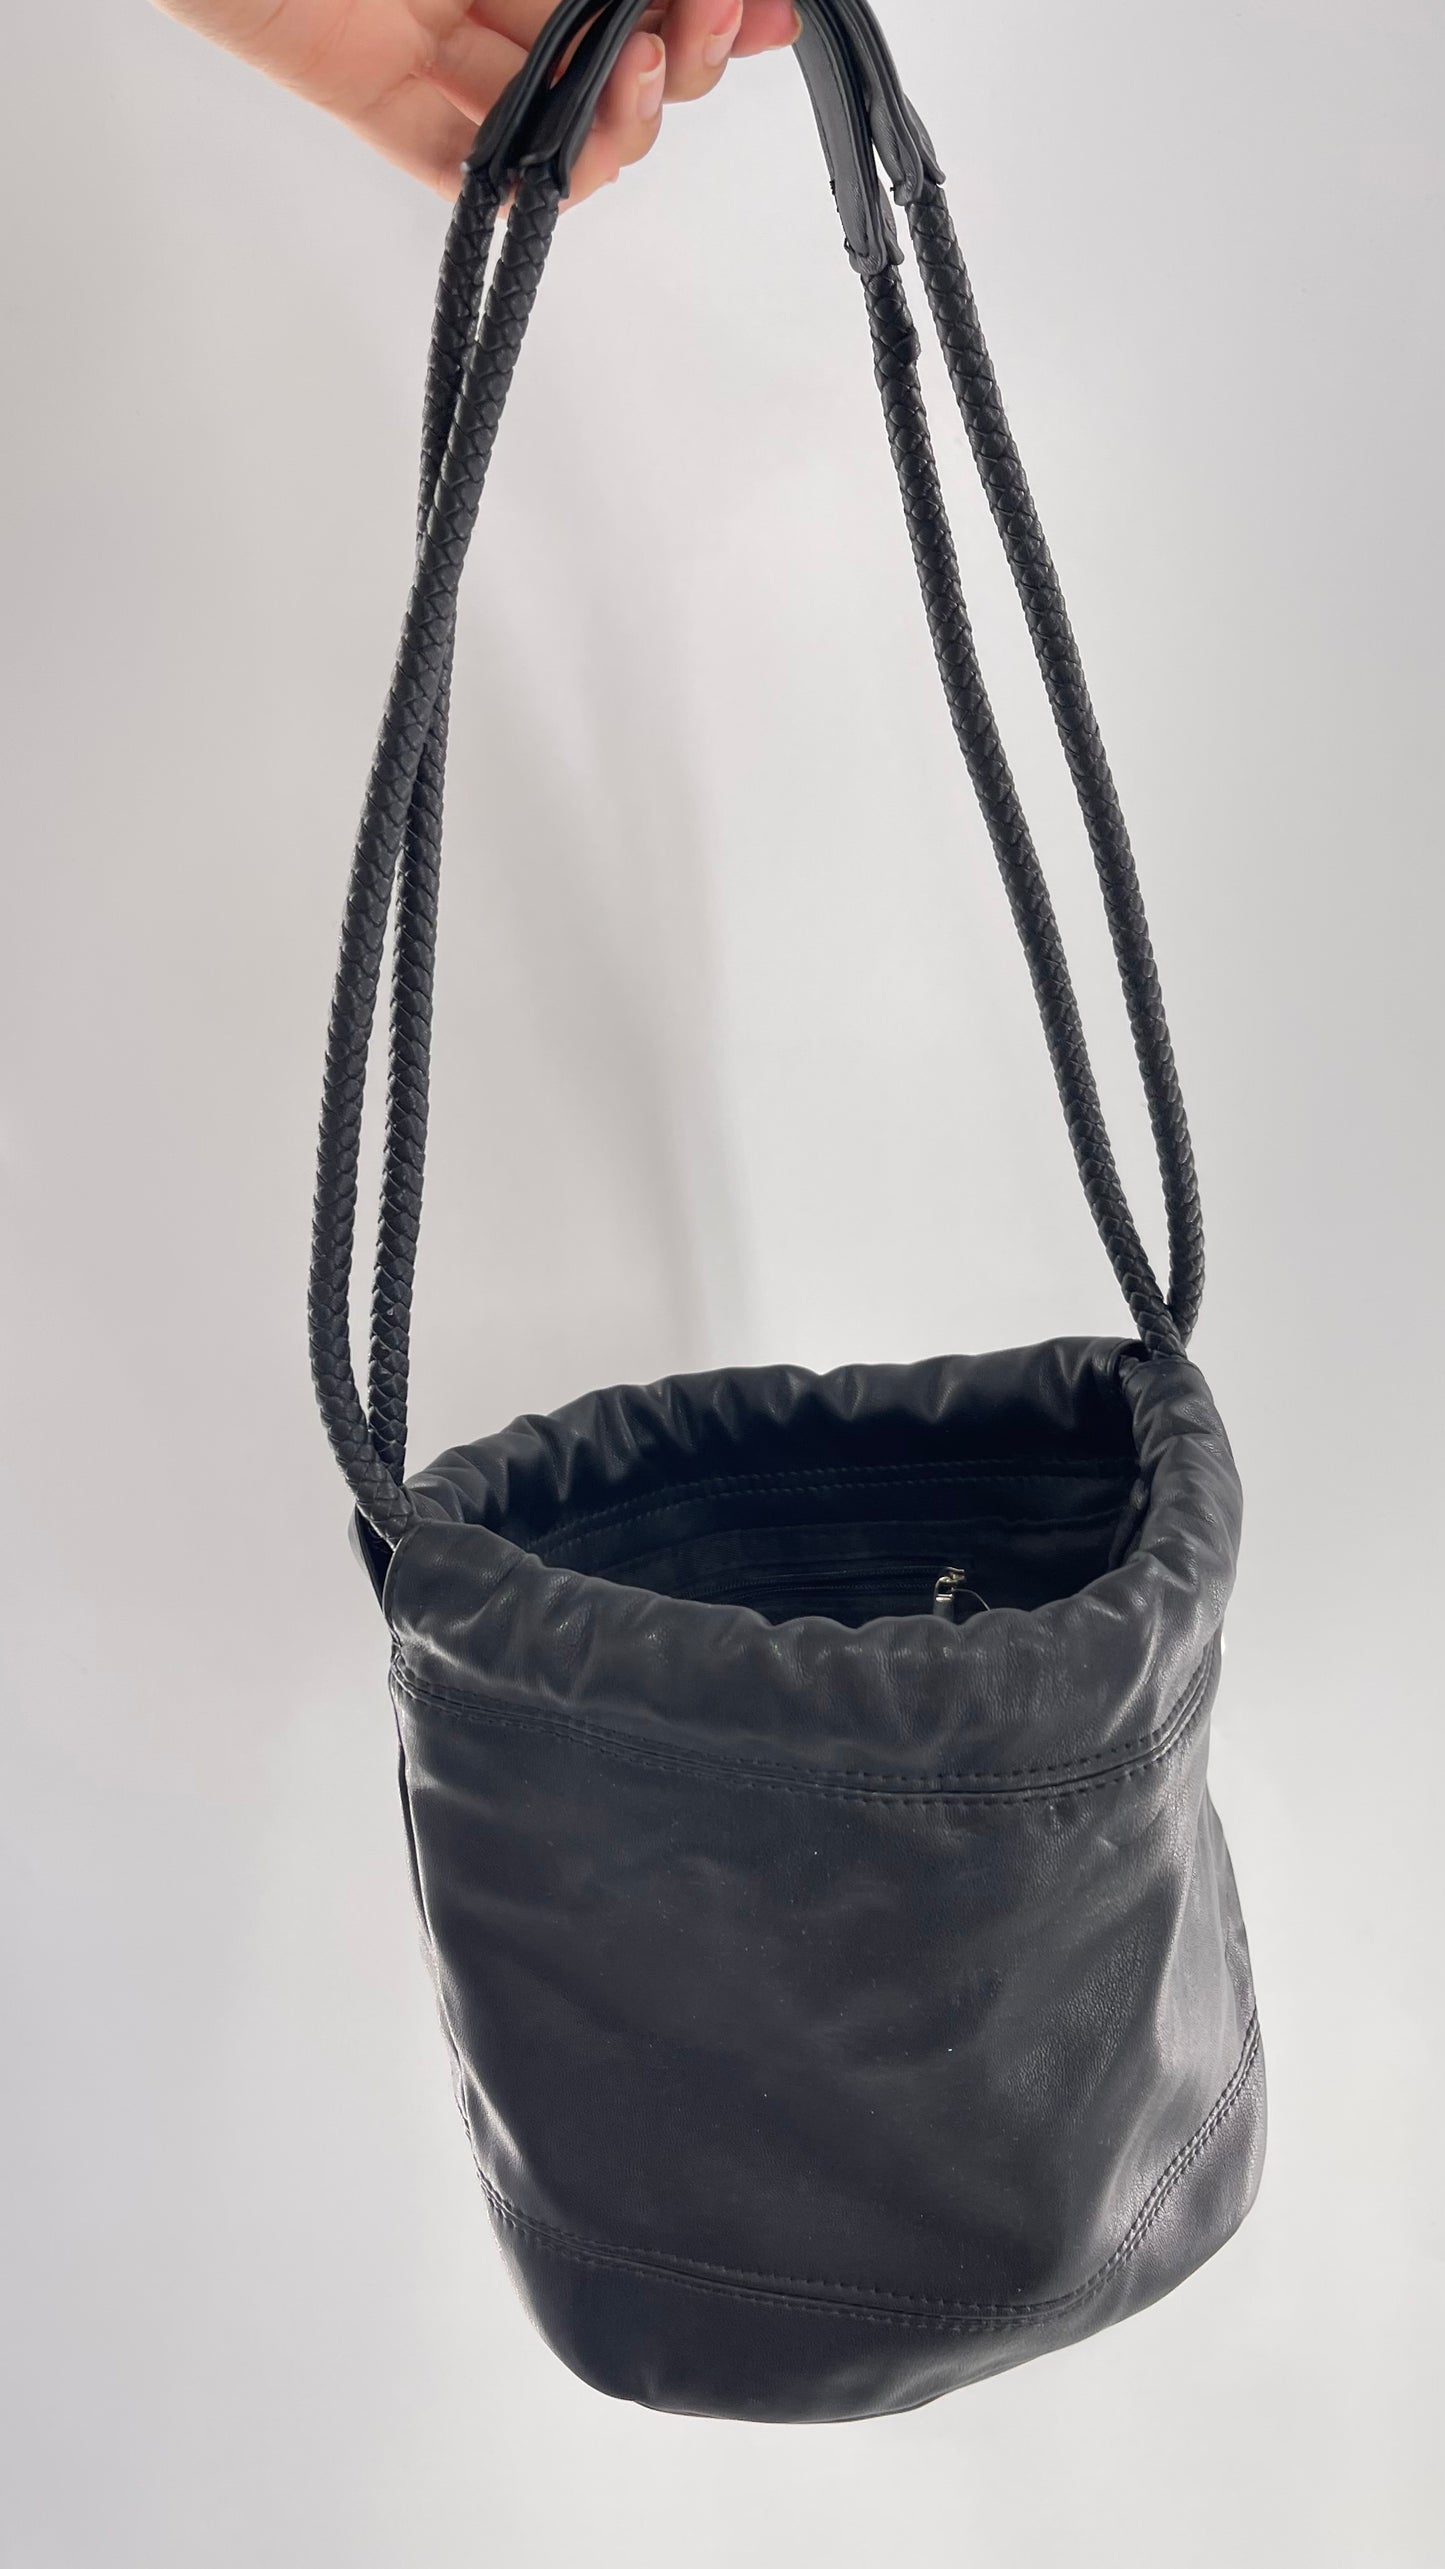 Urban Outfitters Black Adjustable Bucket Tank Vegan Leather Bag with Braided Handles